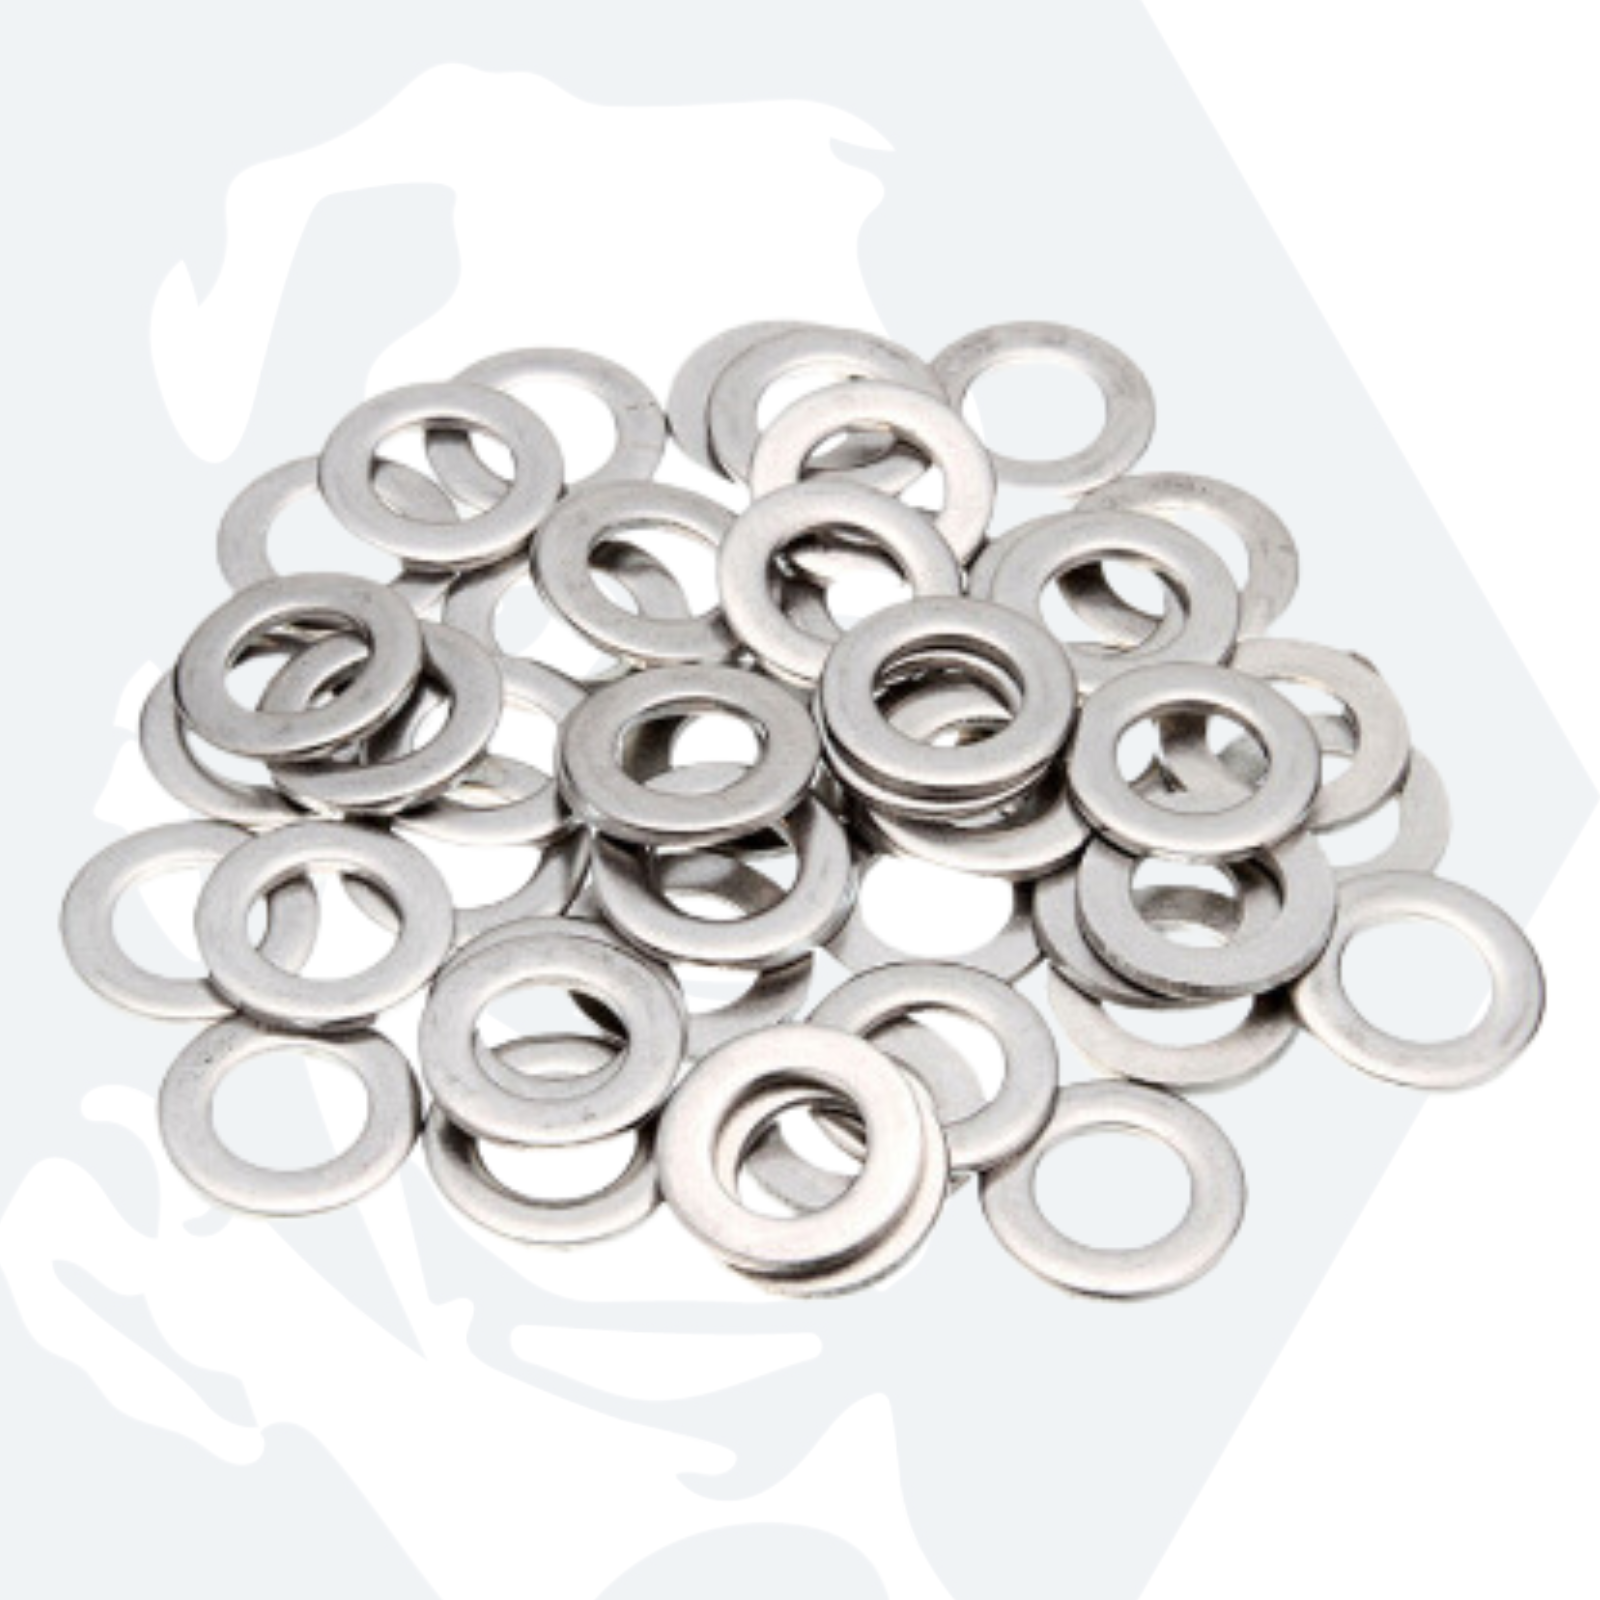 M3.5 Form A Flat Washers (DIN 125) - Stainless Steel (A2)